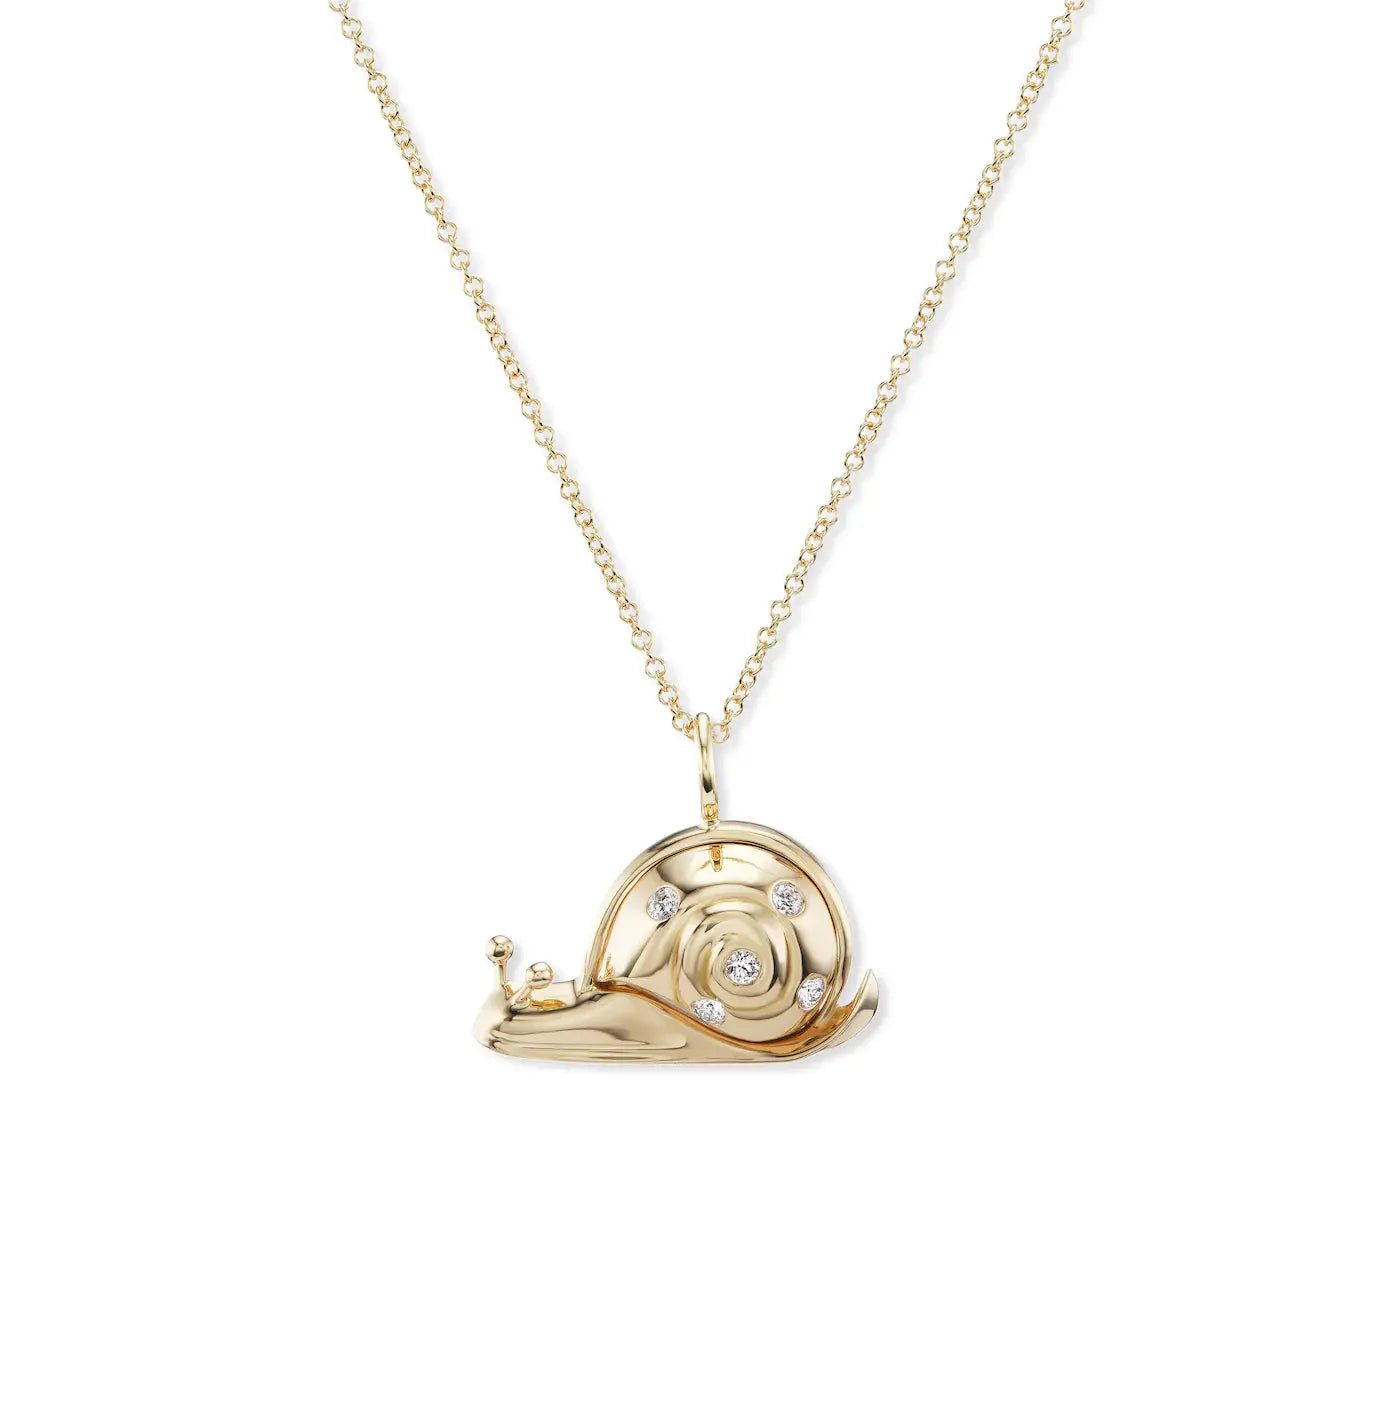 What a playful design, this Brent Neale pendant represents the free-spirited feeling that true luxury is unique, surprising and fun. Hanging at the center of the 18K yellow gold chain is a small 18K yellow gold snail set with brilliant white diamonds.  Total length is 16 inches. The 18K yellow gold snail pendant measures 3/4" x 7/8" including the bale. The diamonds are 1.5mm diameter each and pendant is 0.5" x 0.85".